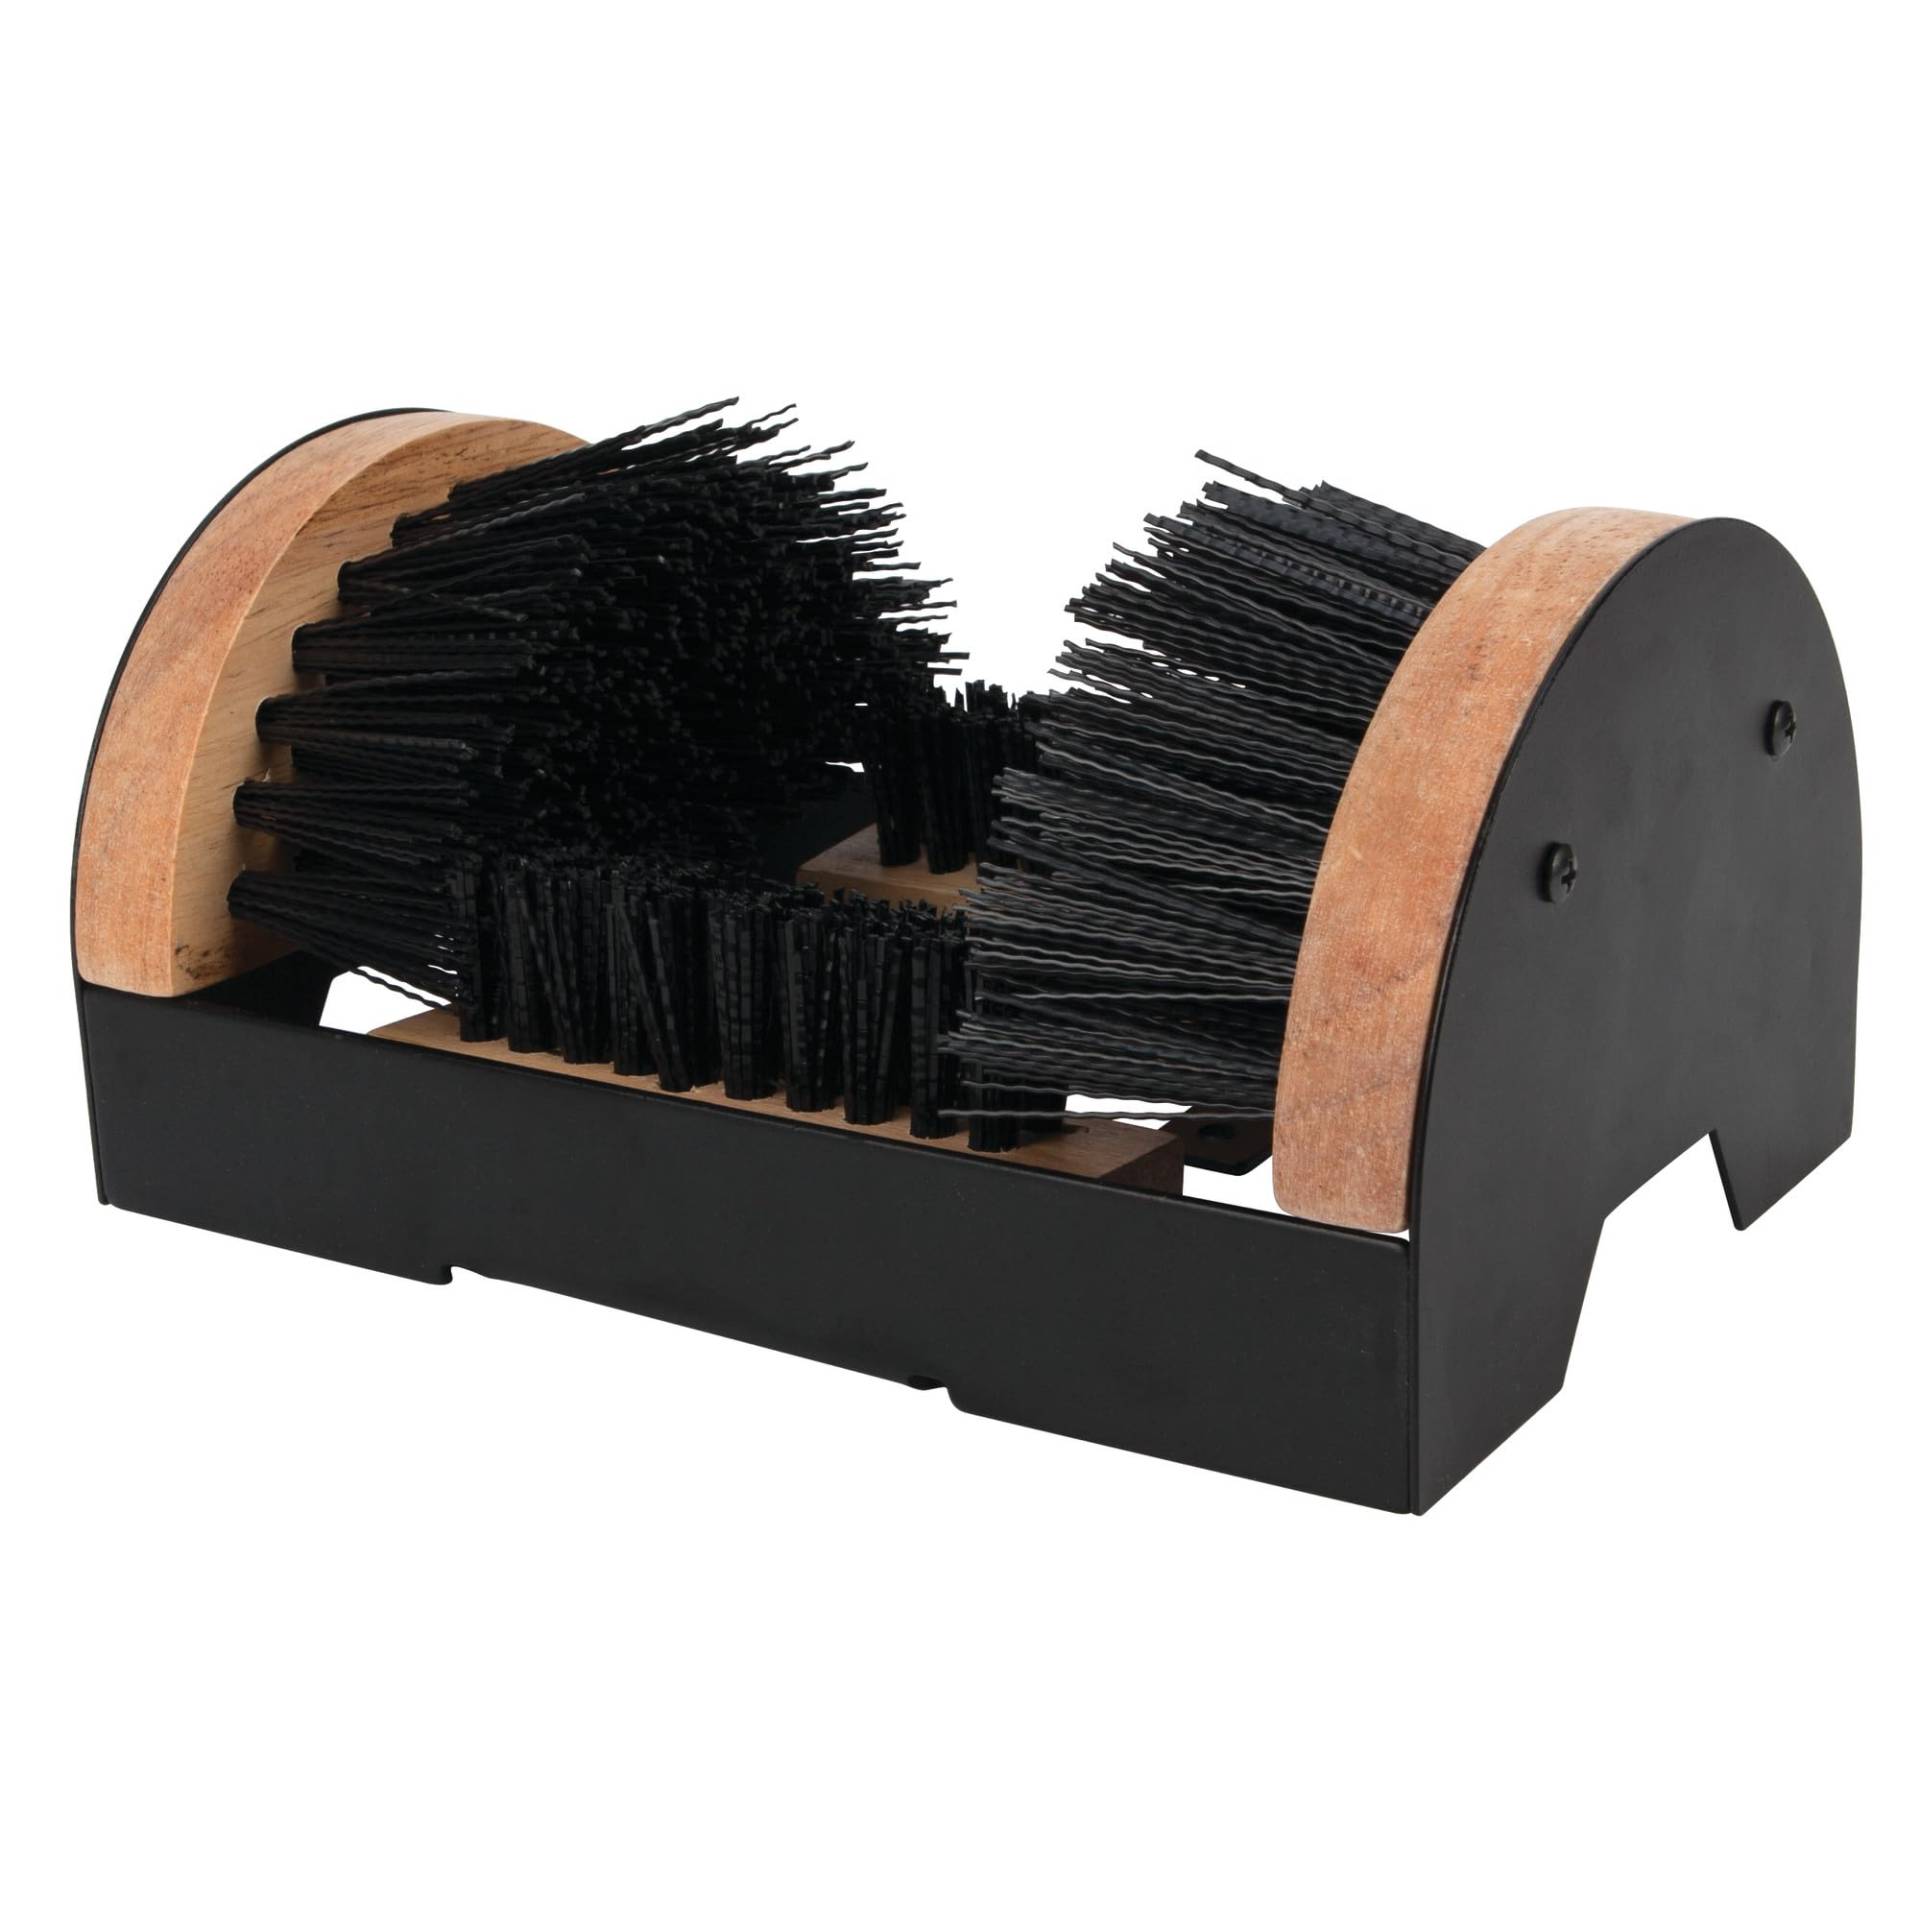 Performance Tool W9451 Boot Brush Cleaner Floor Mount With Hardware Indoor / Outdoor 4.7 x 9.5 x 6.5-Inches. von PERFORMANCE TOOL